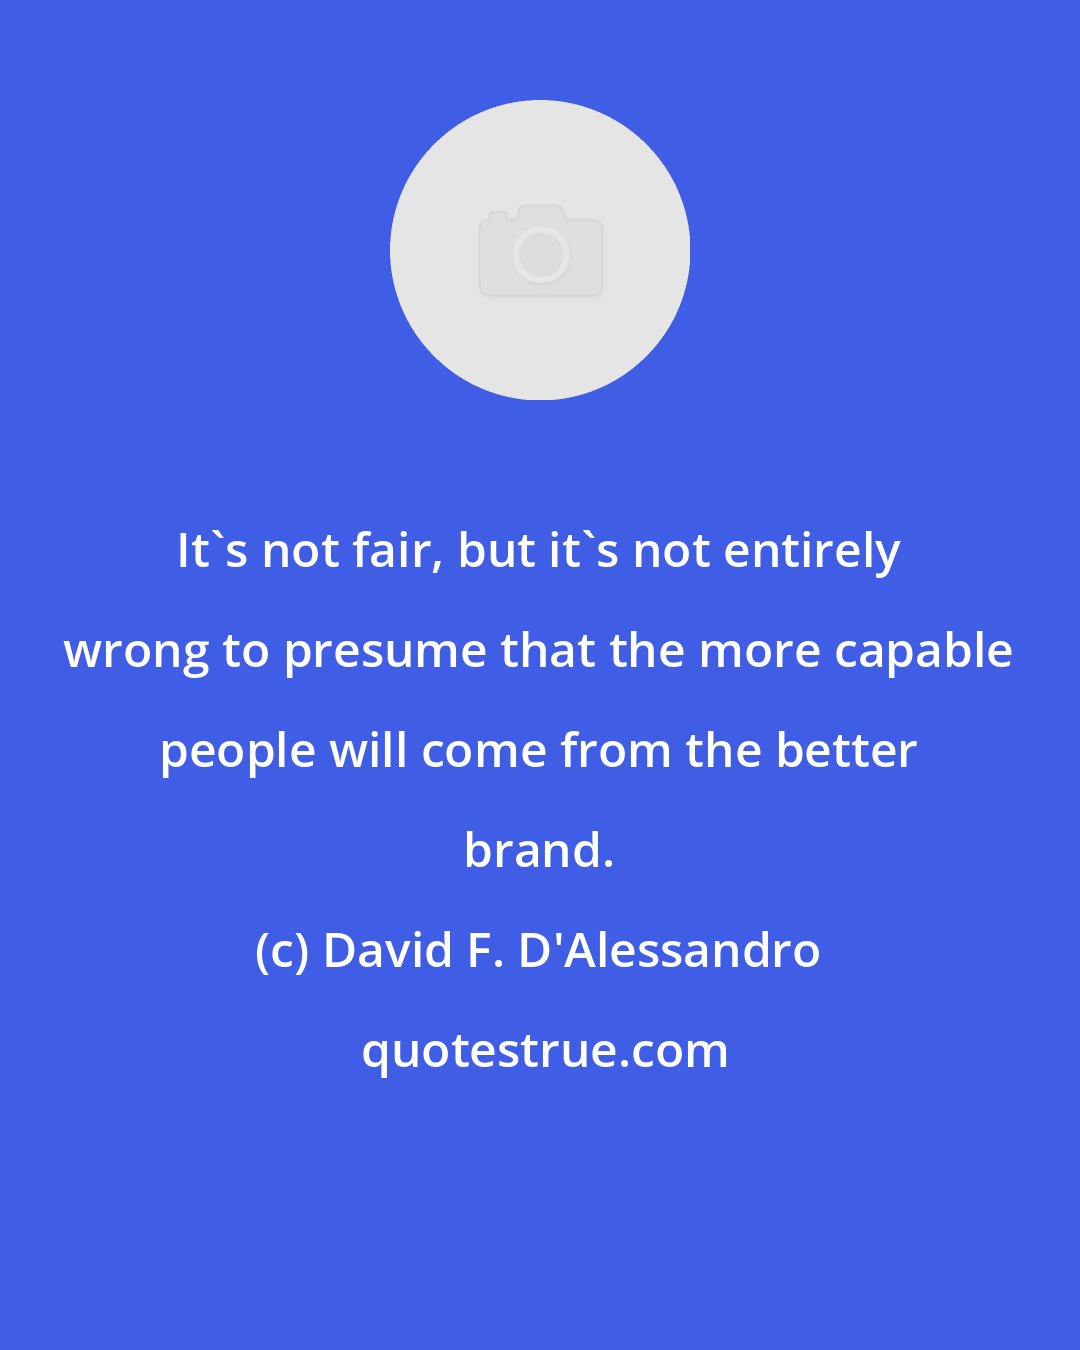 David F. D'Alessandro: It's not fair, but it's not entirely wrong to presume that the more capable people will come from the better brand.